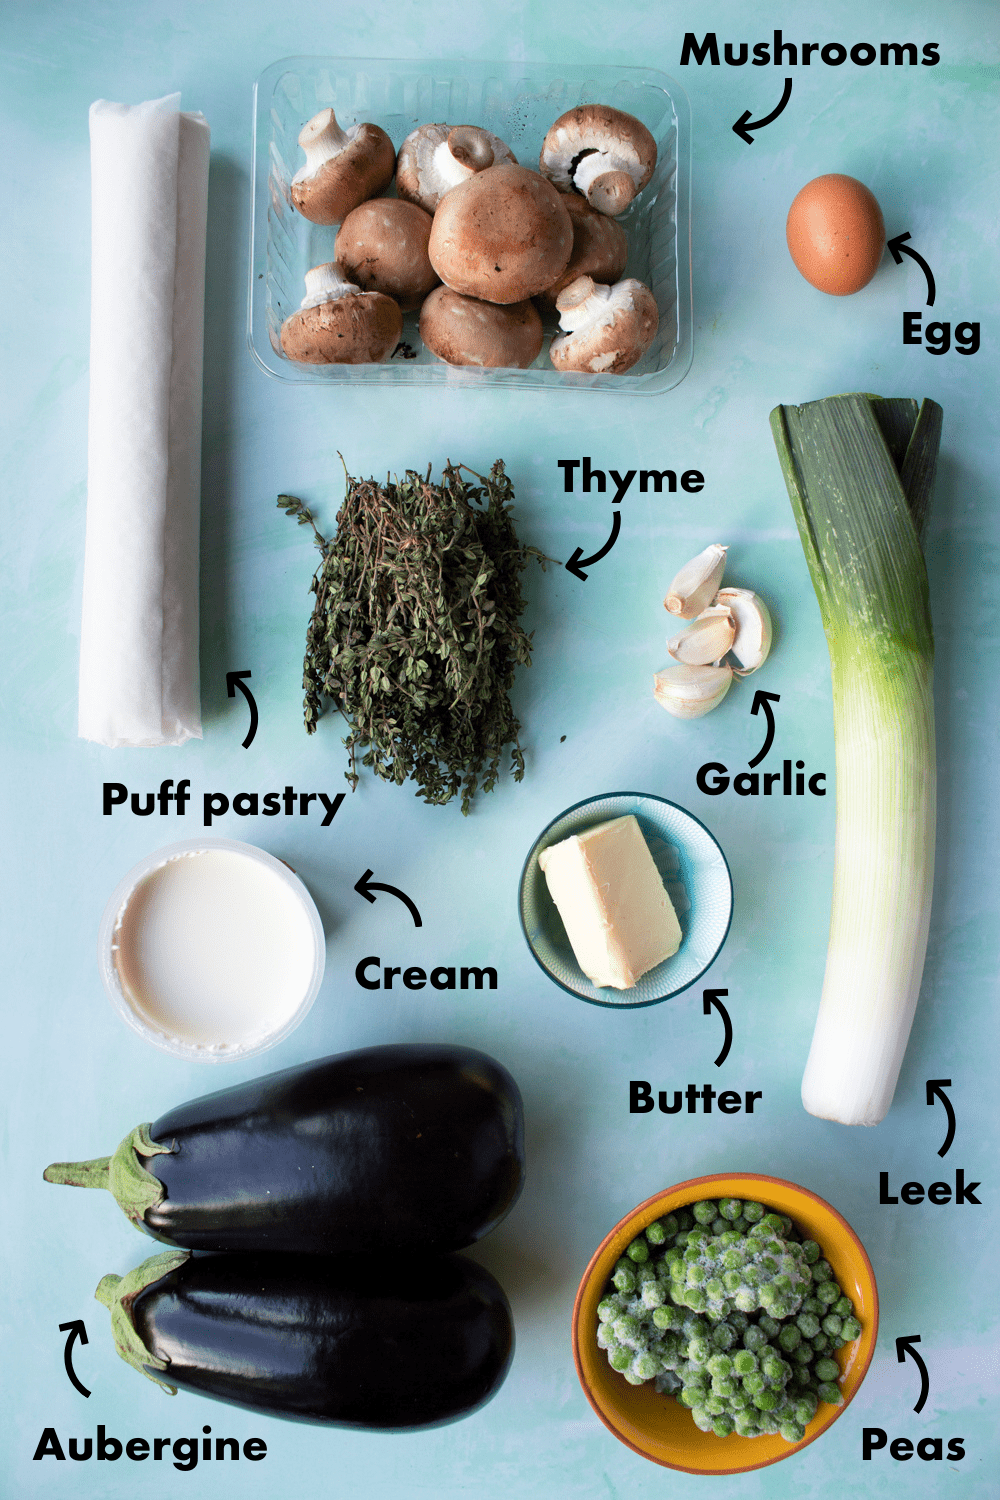 Ingredients to make Creamy Mushroom, Leek and Aubergine Vegetable Pie with Puff Pastry laid out on pale blue background and labelled.